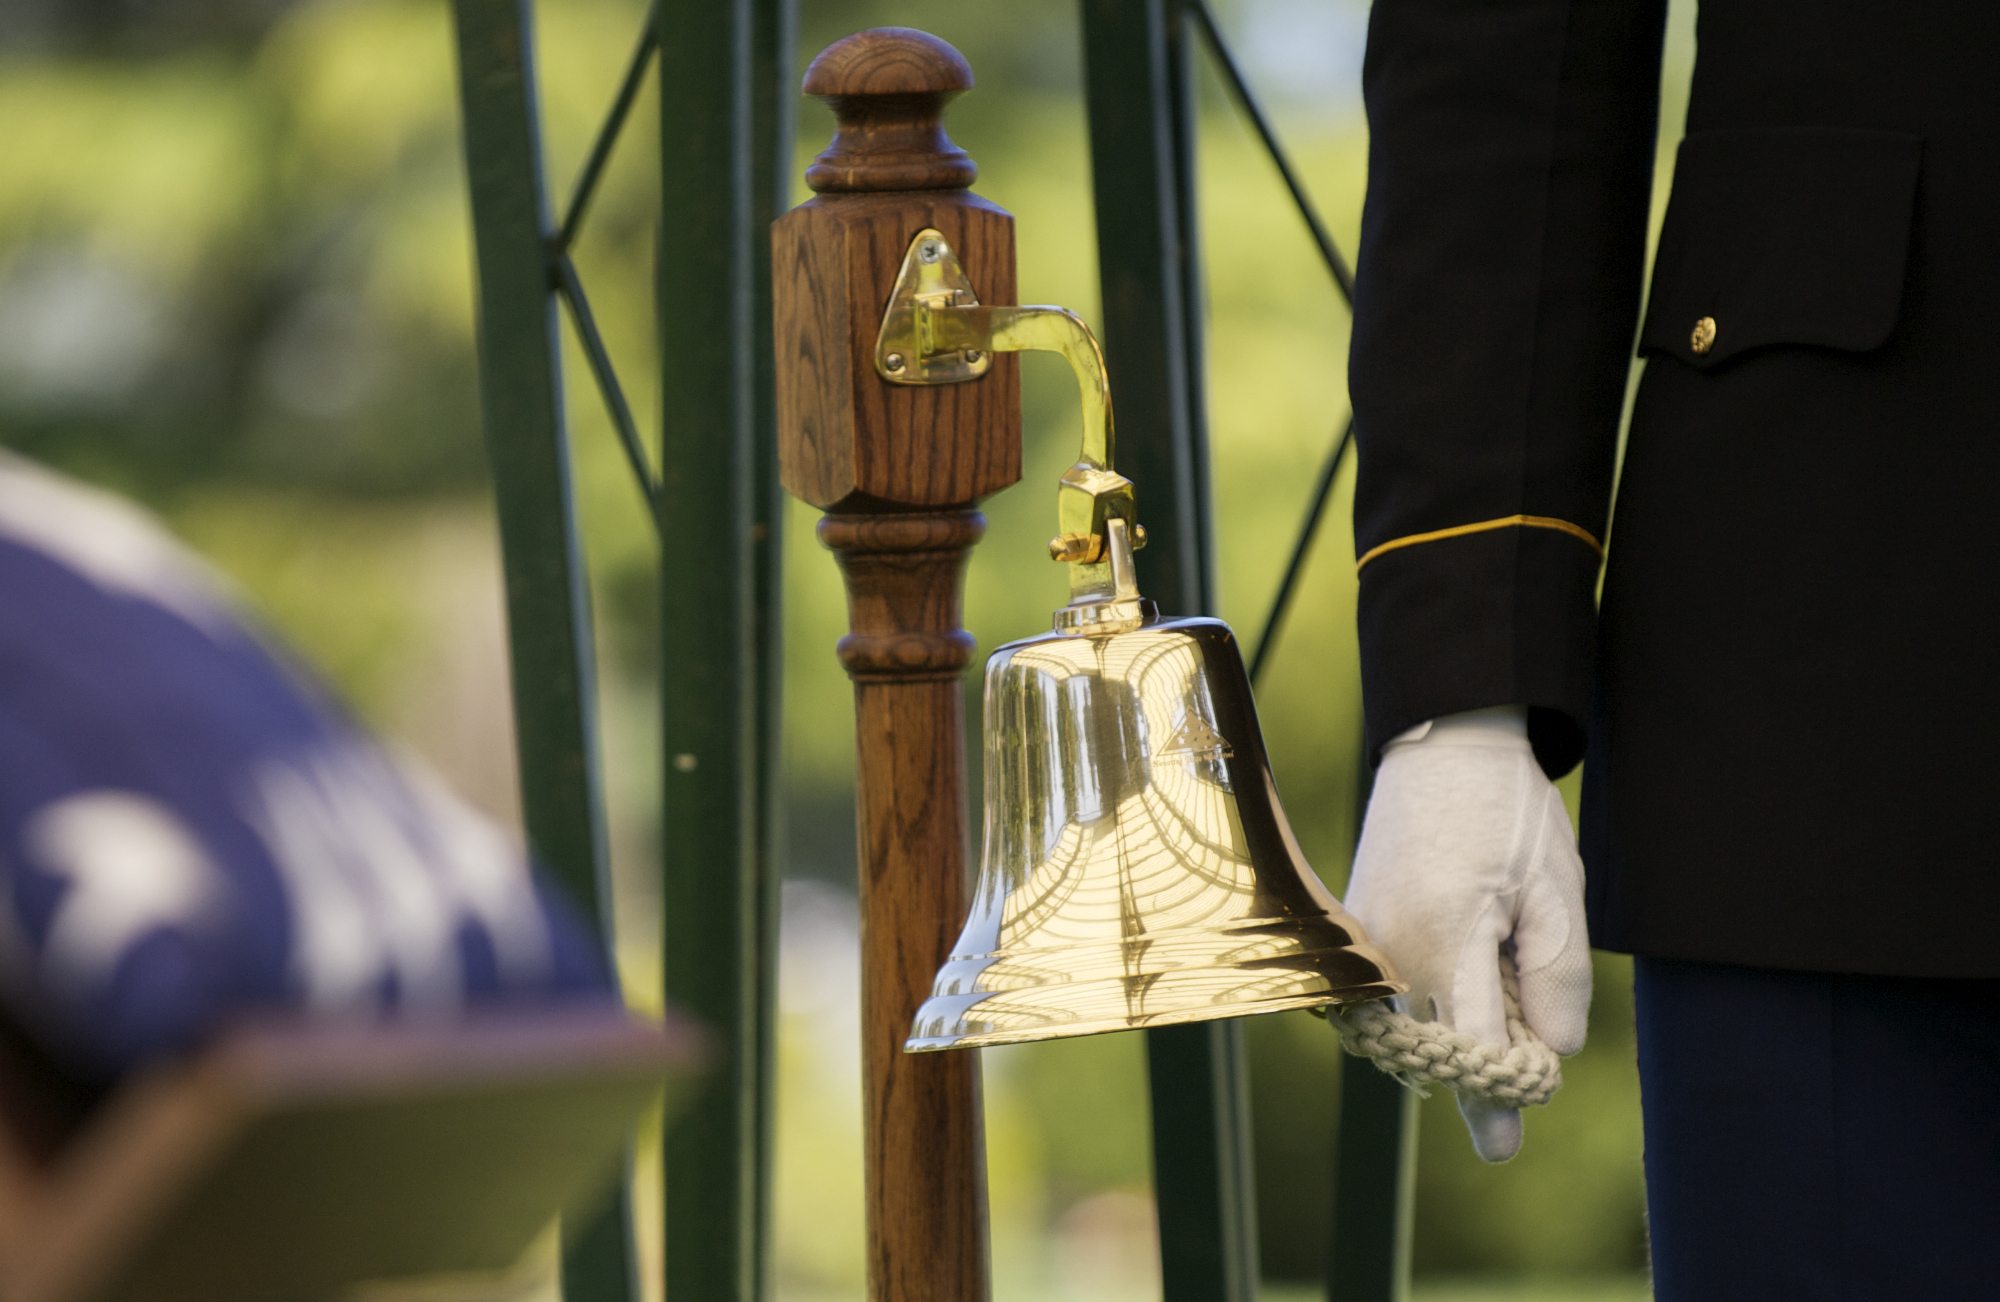 Steven Lane/The Columbian
A bell rang 92 times, once for each name read, during a memorial service at Evergreen Memorial Gardens for veterans who did not receive a full military funerals.